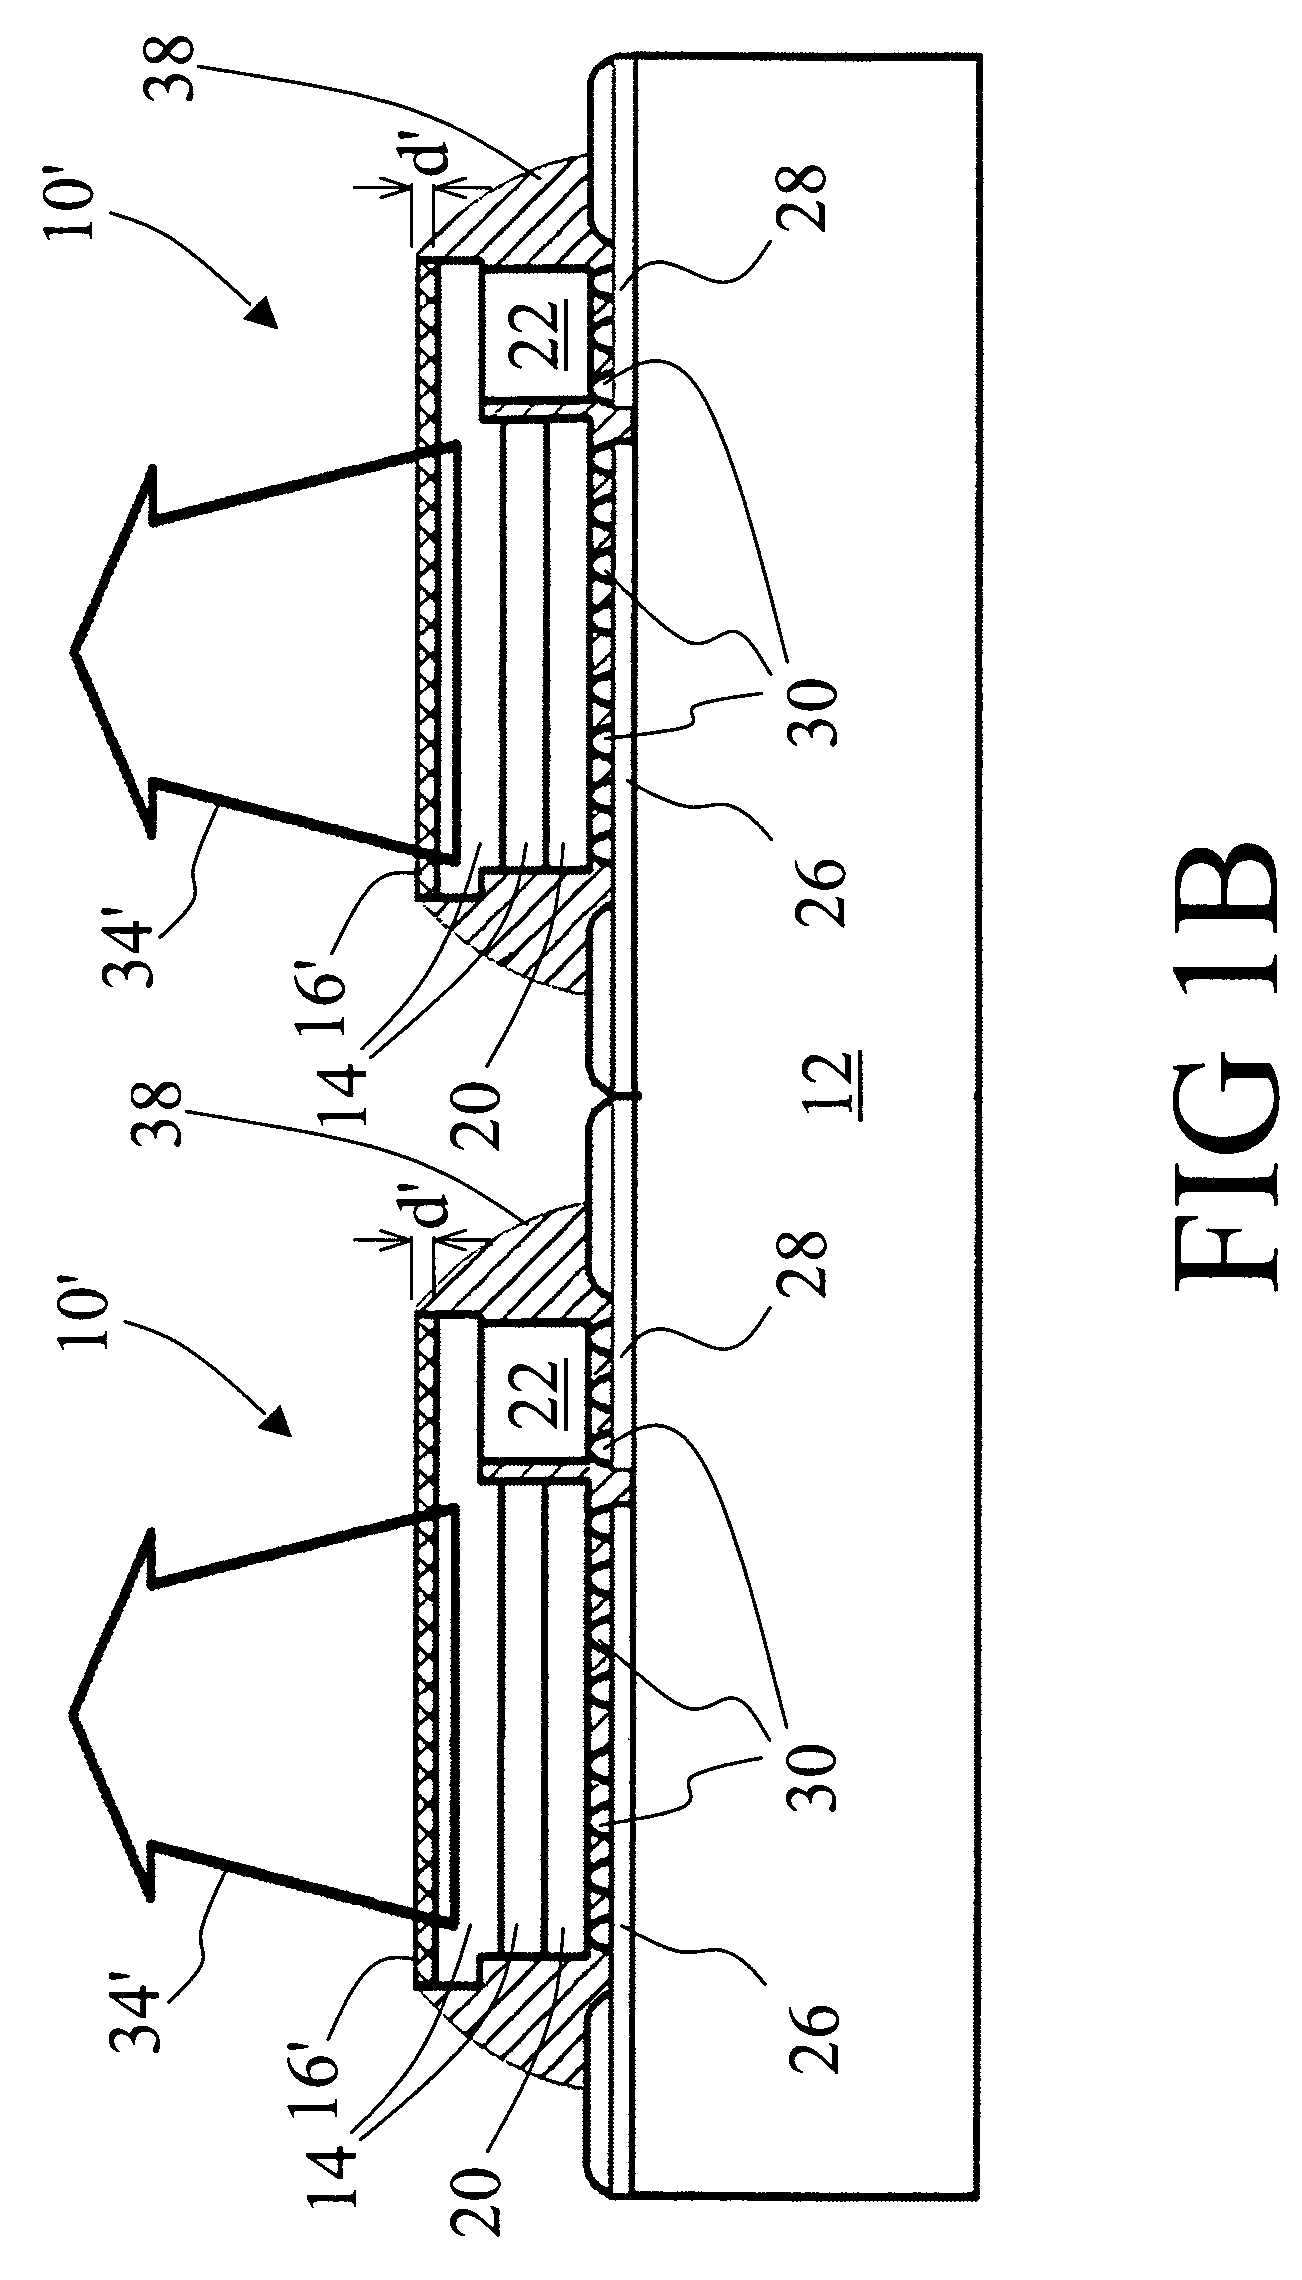 Flip chip light emitting diode devices having thinned or removed substrates